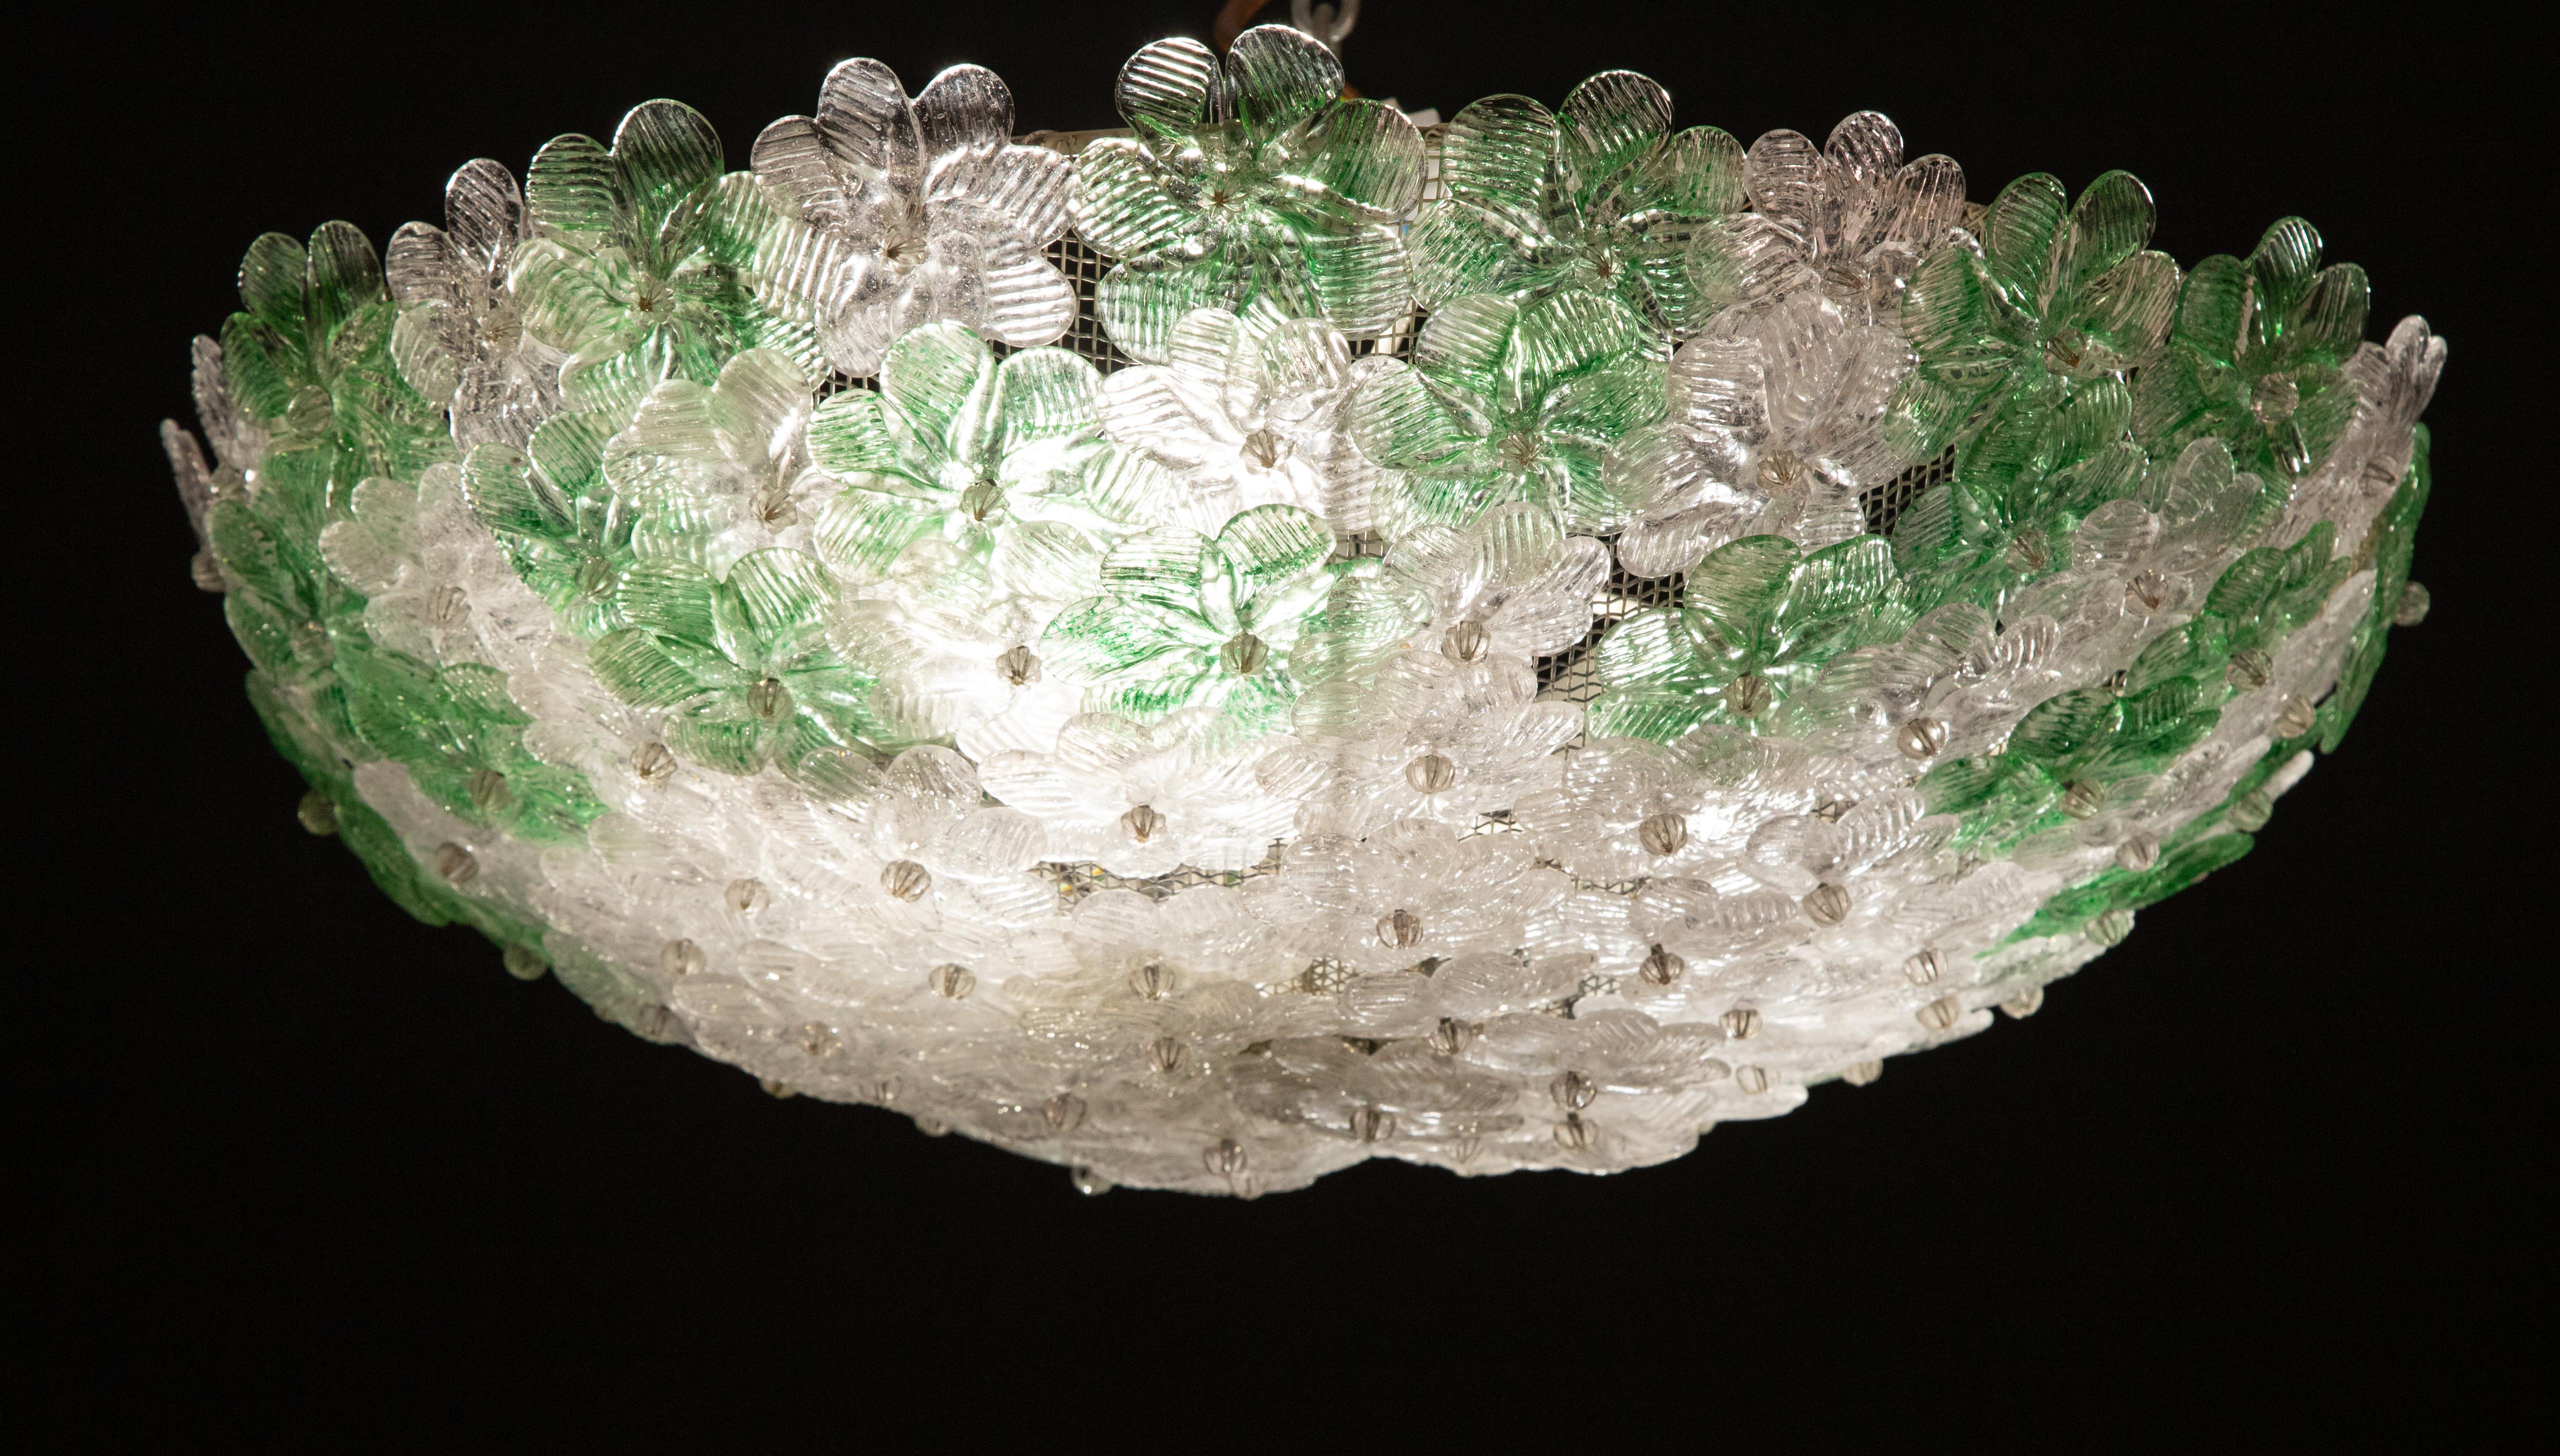 Elegant six-light ceiling lamp with Murano glass flowers, made by Barovier e Toso.
White-painted metal ceiling basket with overlapping flowers made of hand blown Murano glass in green and transparent color with gold inclusions, attached